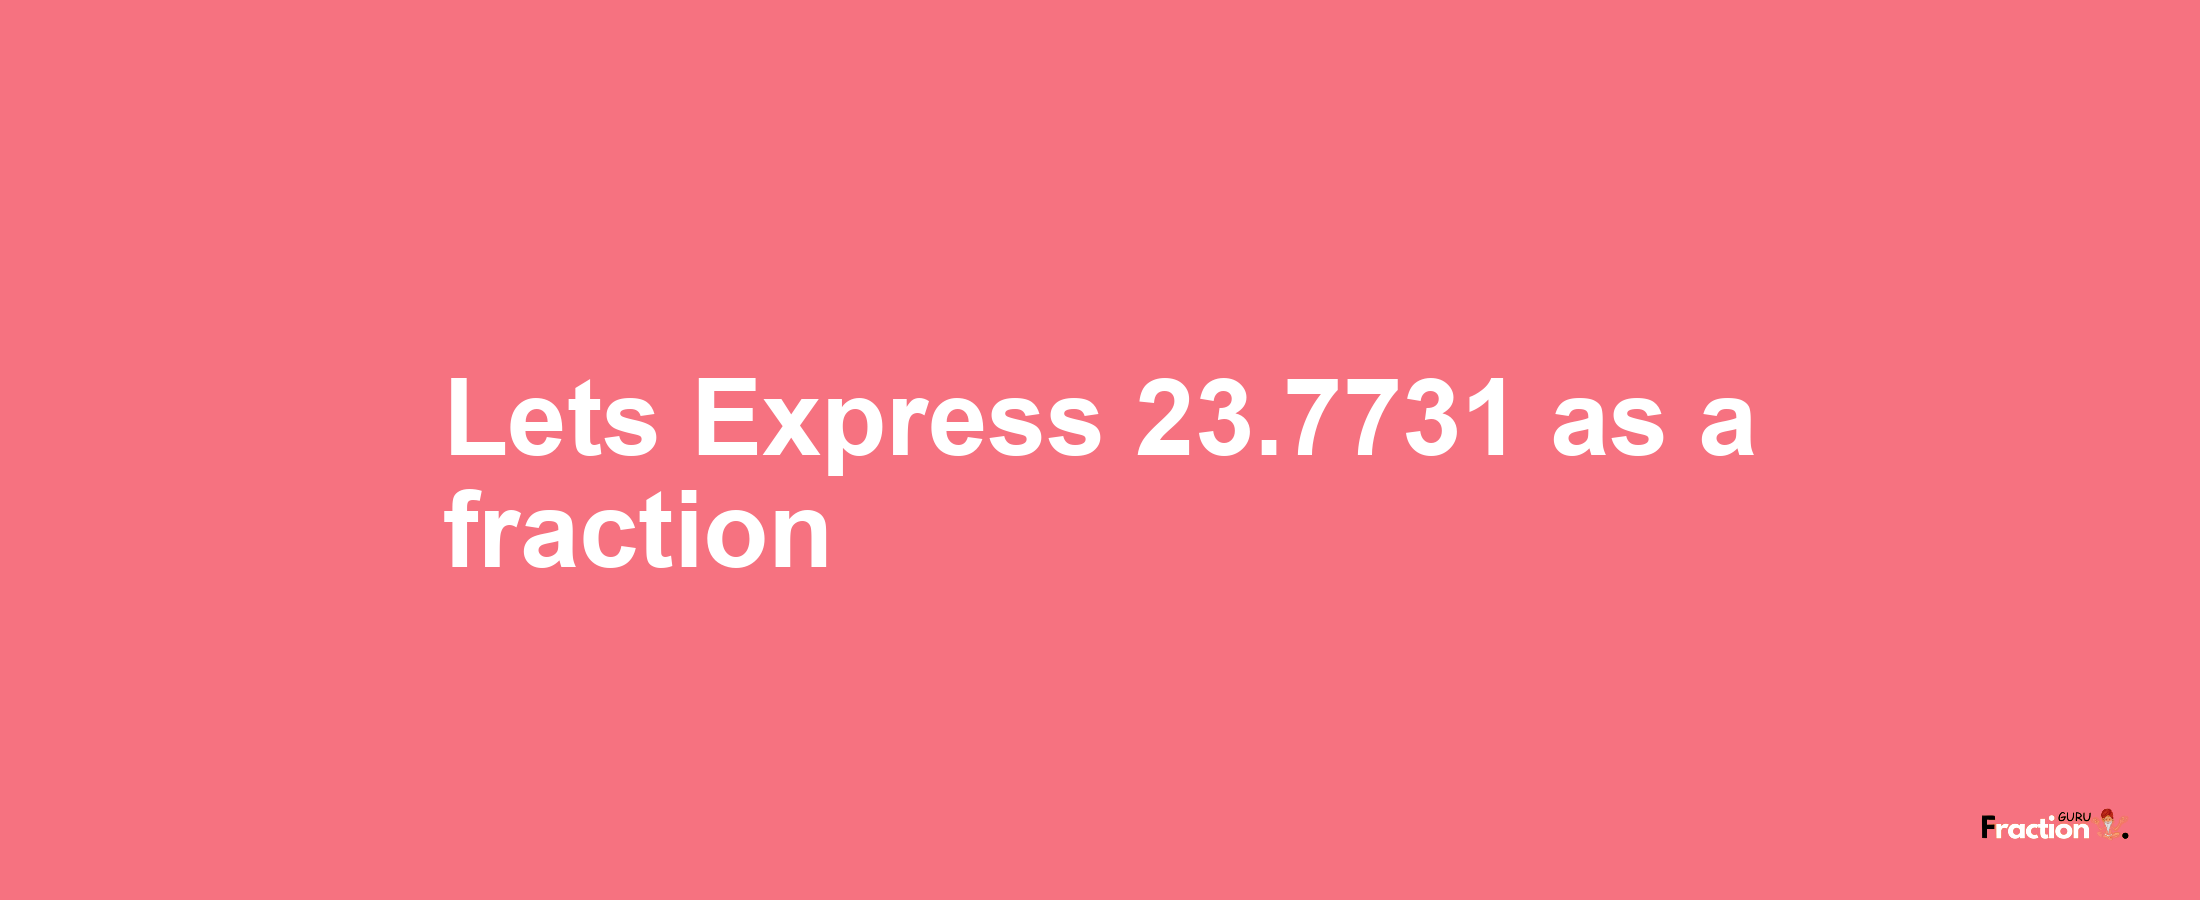 Lets Express 23.7731 as afraction